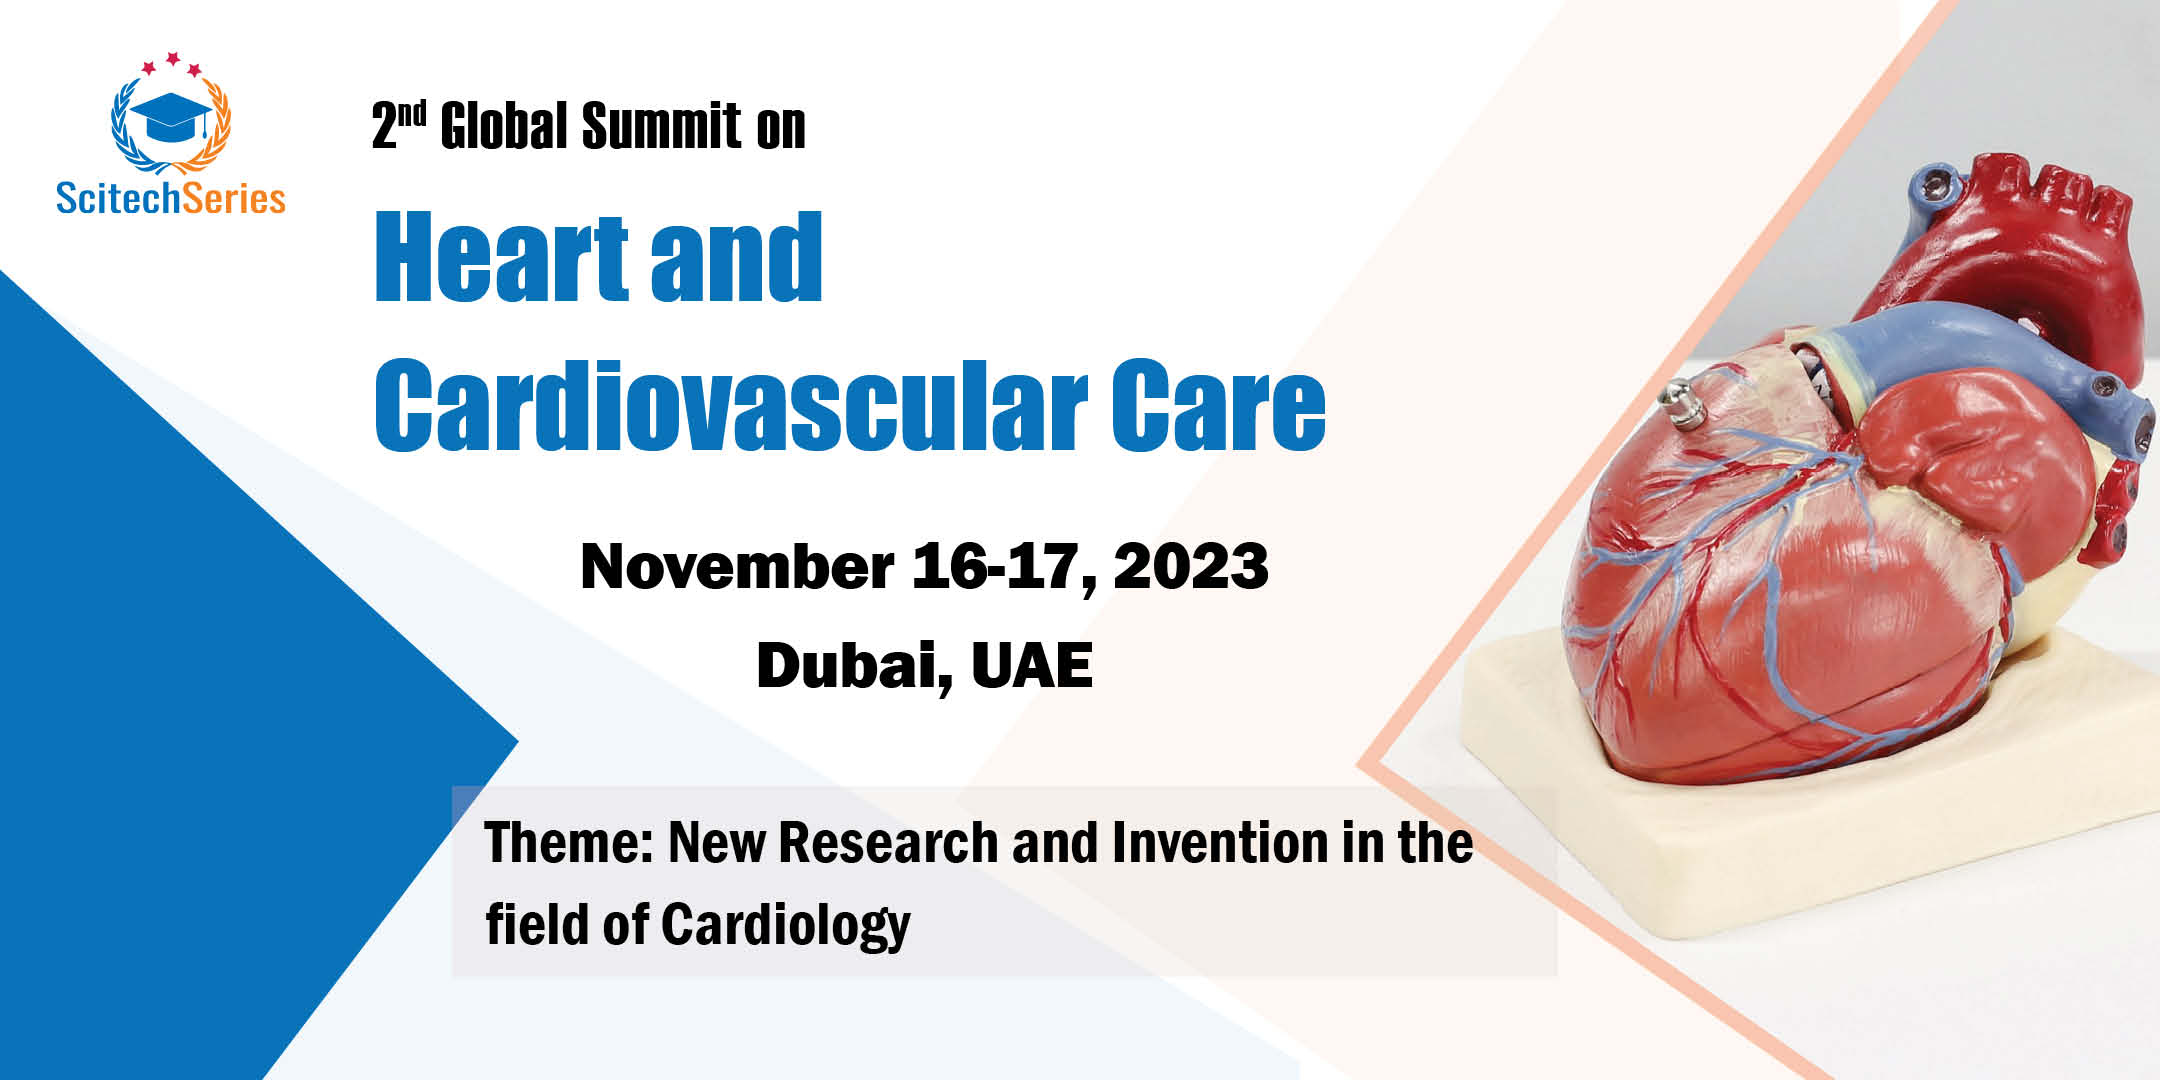 2nd Global Summit on Heart and Cardiovascular Care